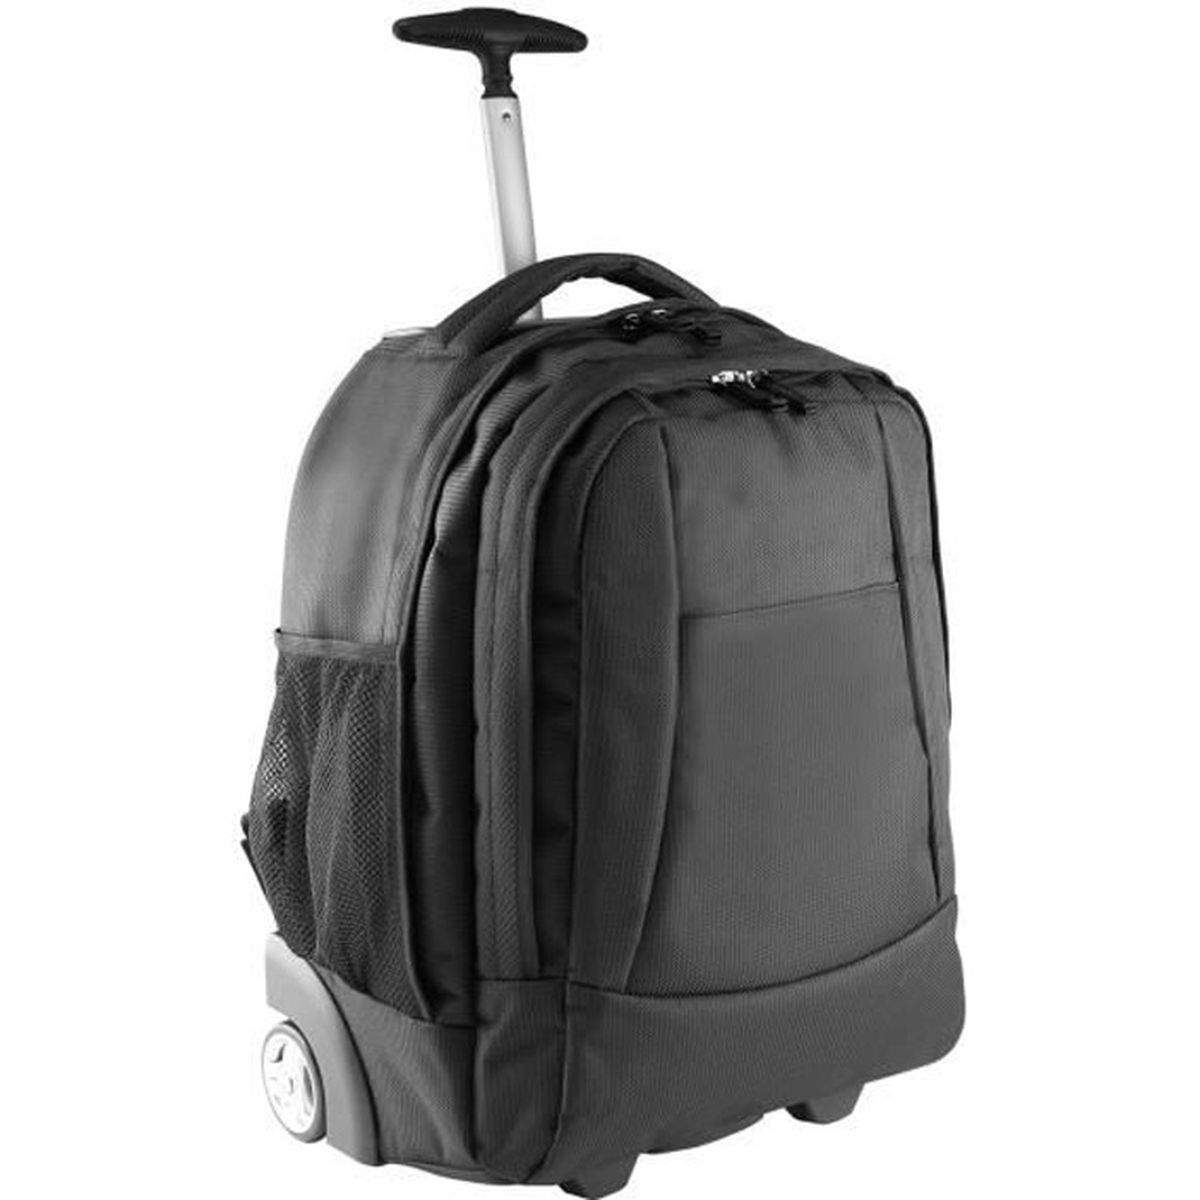 Unisexe Designer Inspired Luggage Holdall valise cabine approuvé Trolley Sac à main